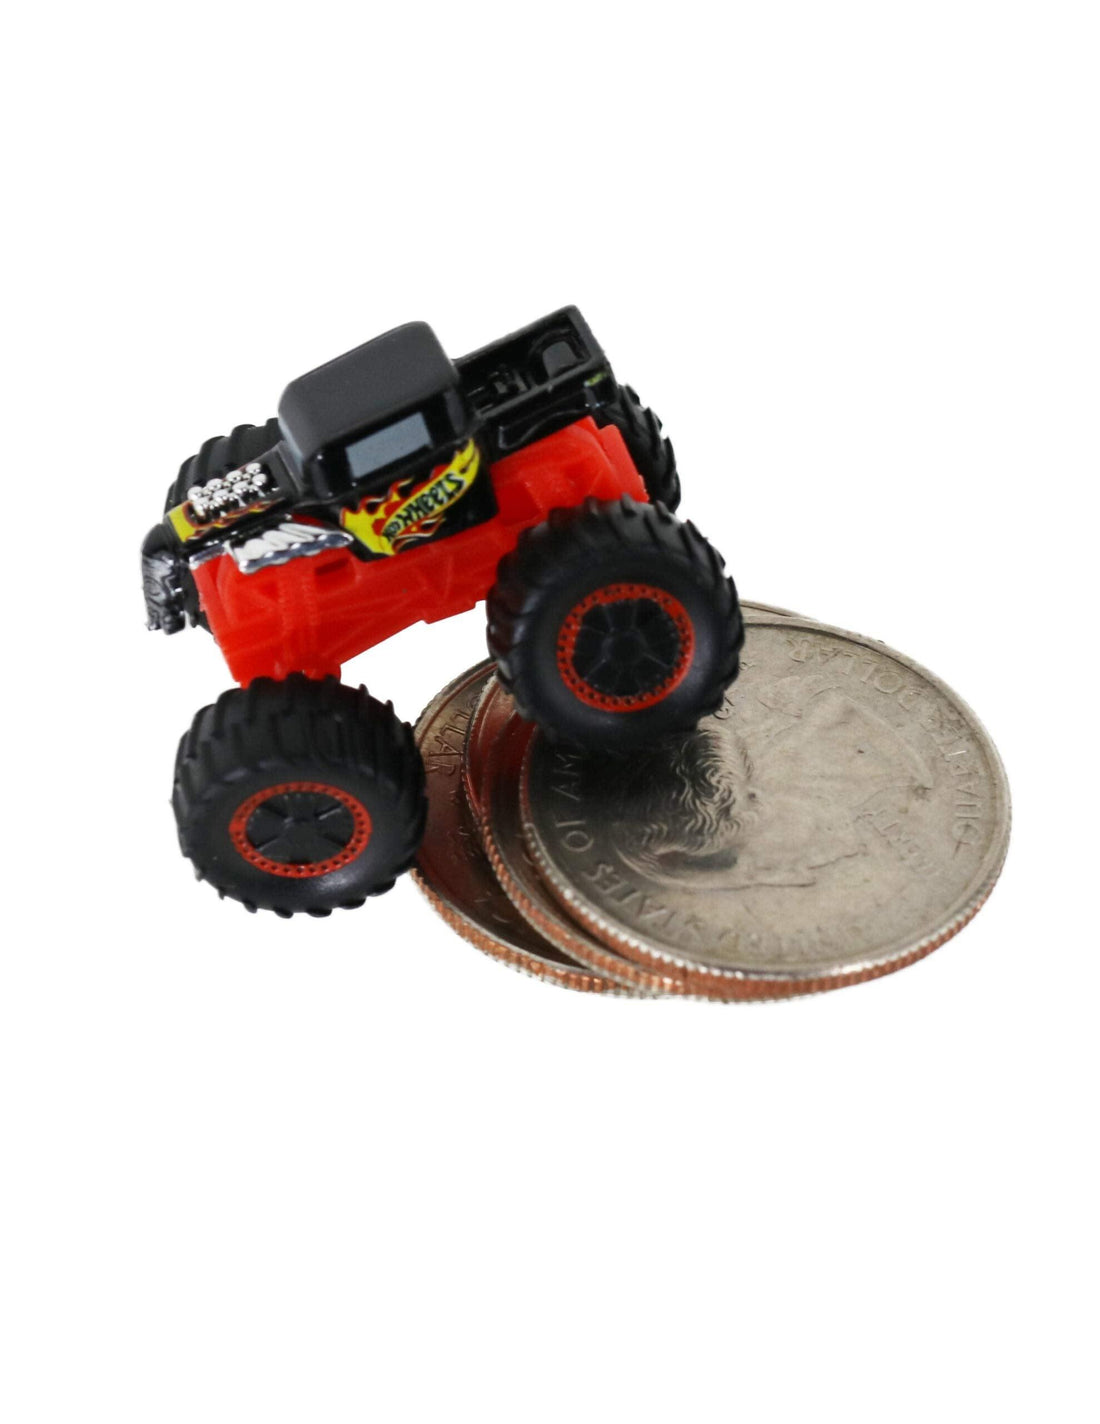 HOT WHEELS MONSTER TRUCK - THE TOY STORE